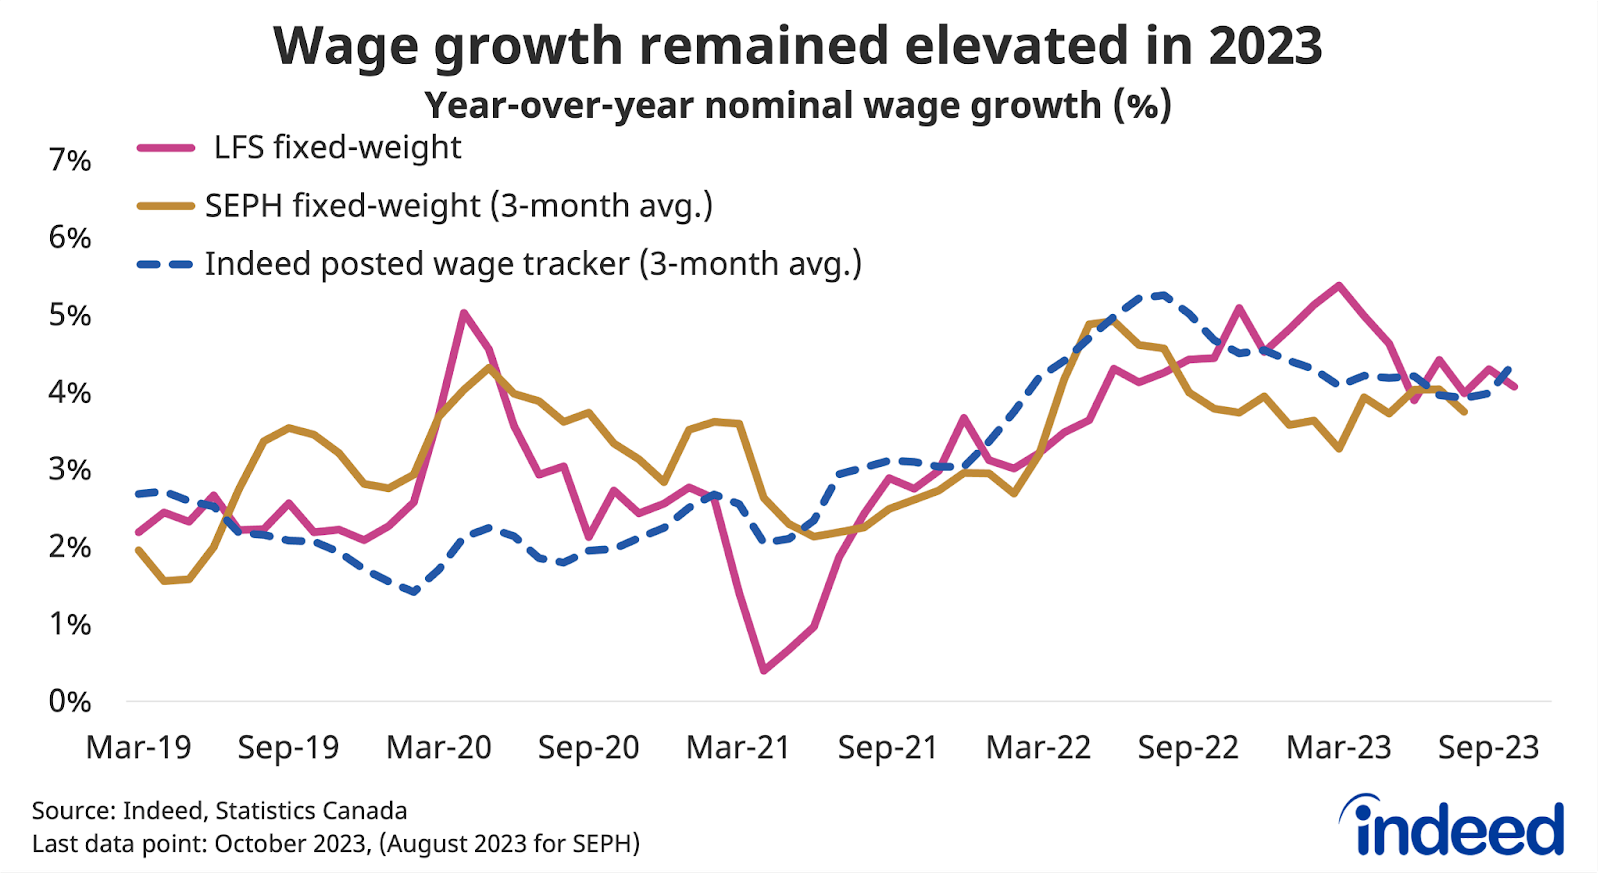 Line graph titled “Wage growth remained elevated in 2023,” shows the pace of year-over-year wage growth between March 2019 and October 2023, with different coloured lines representing LFS fixed-weight earnings, SEPH fixed-weight earnings (3-month avg.), and Indeed posted wage tracker (3-month avg.). All three measures were in the range of 4% year-over-year, in most cases above their pre-pandemic levels.   